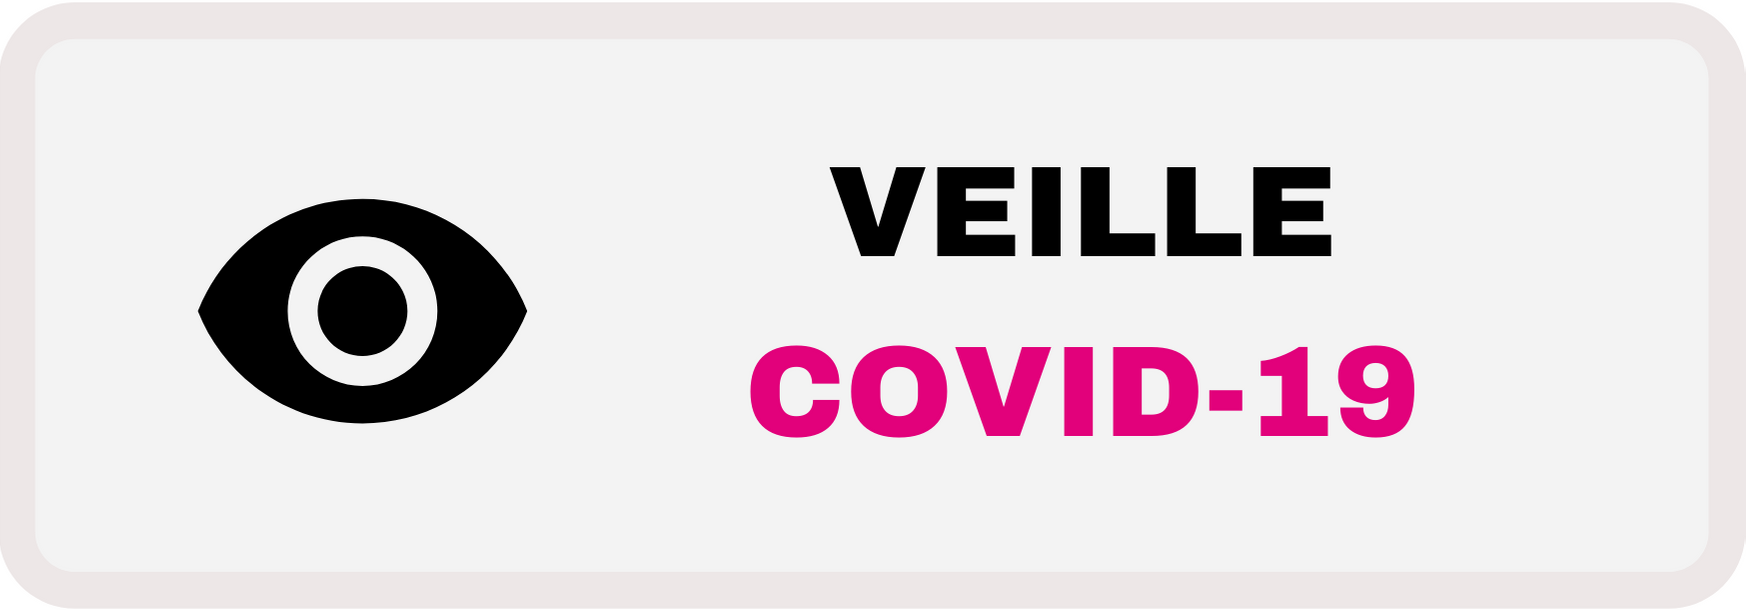 bouton veille covid-19